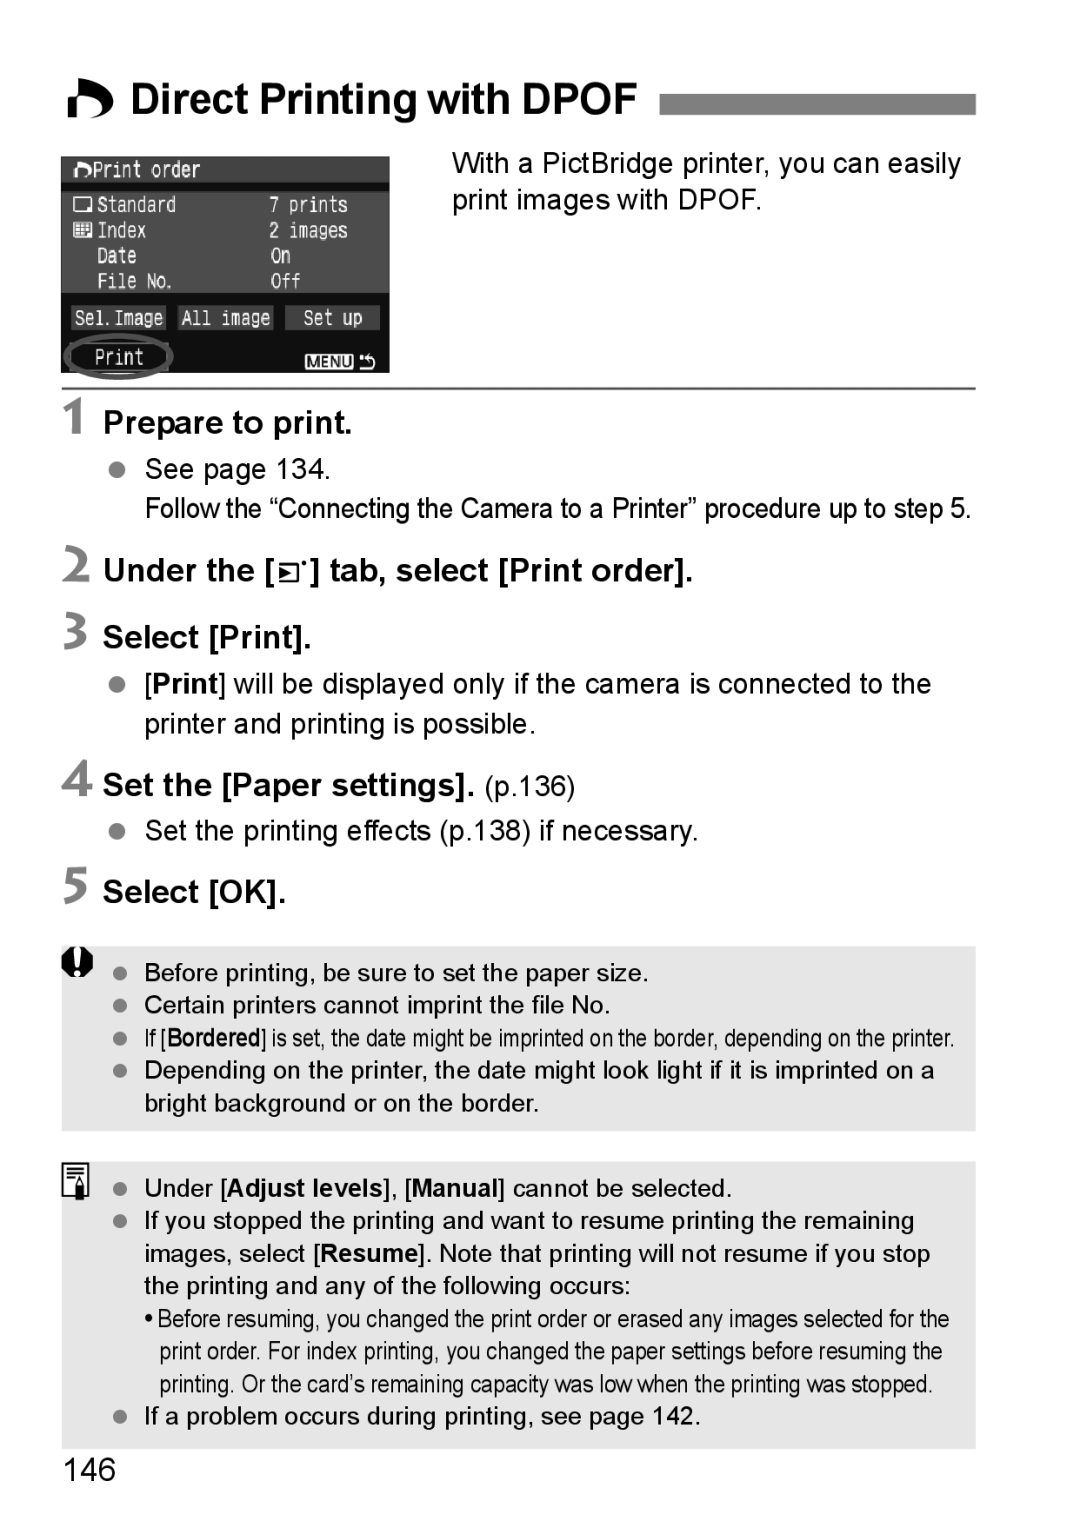 Canon EOS 450D WDirect Printing with Dpof, Prepare to print, Under the 3 tab, select Print order Select Print, 146 